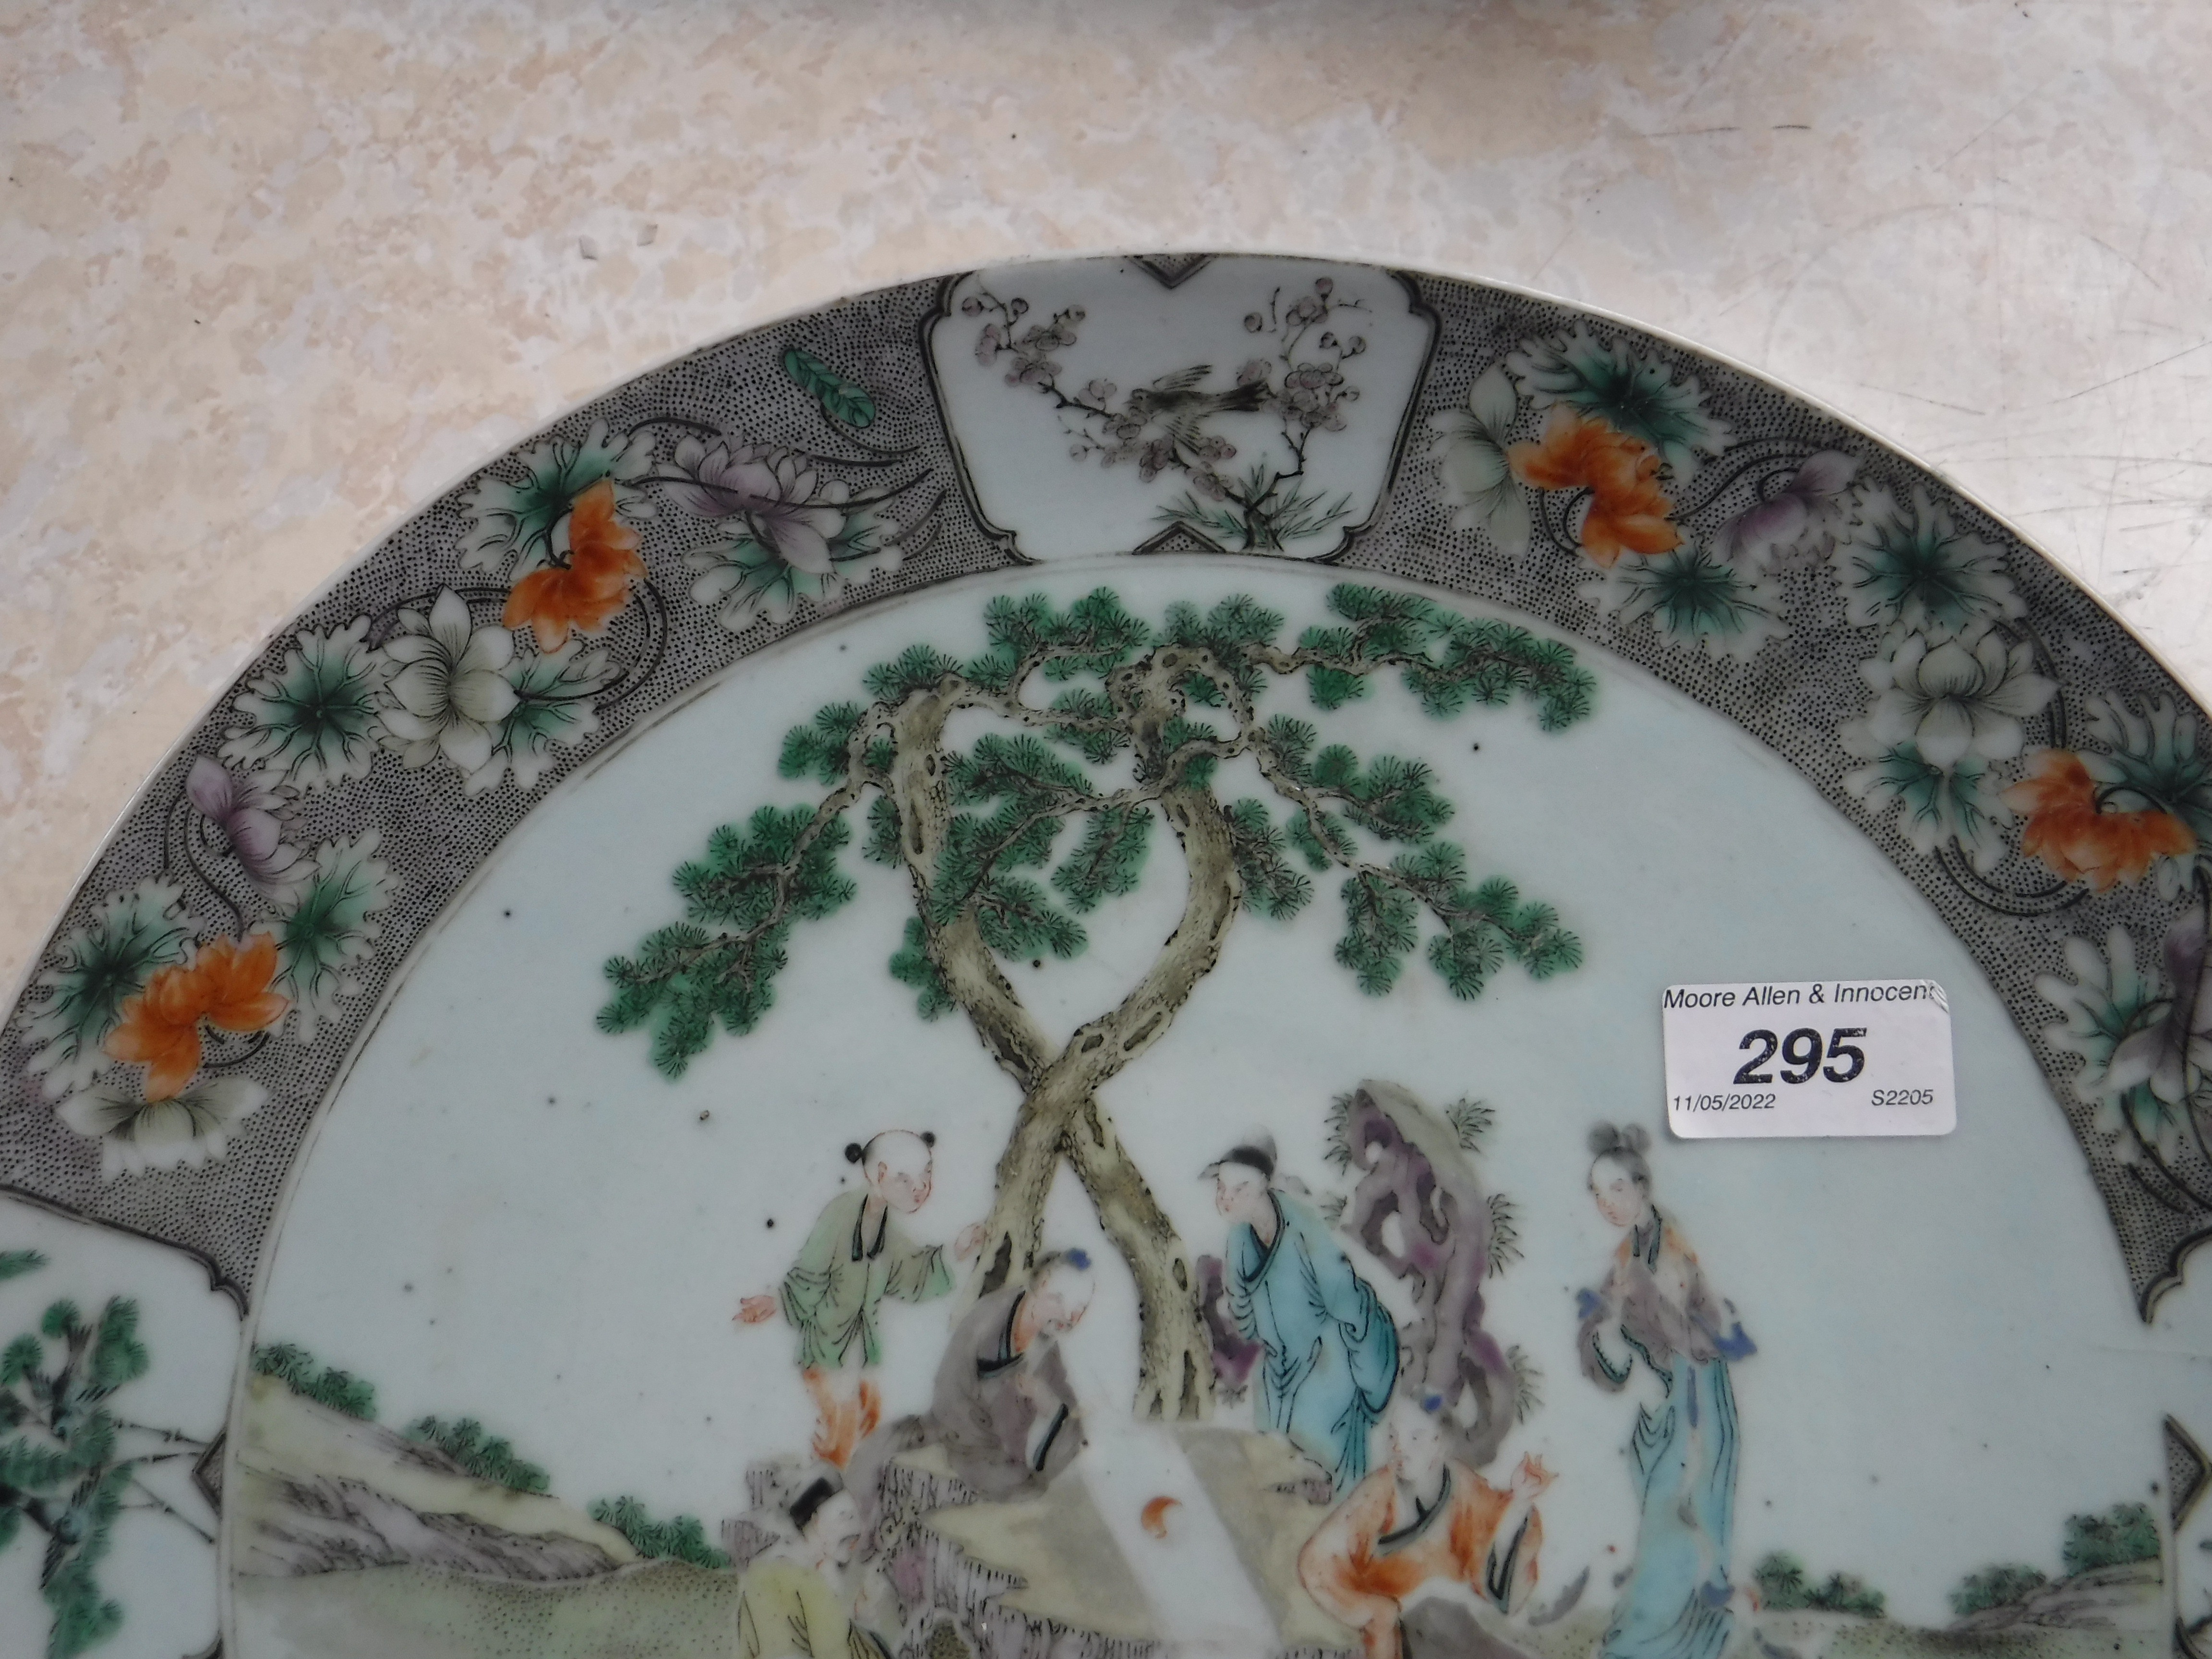 A Kangxi style porcelain charger decorated with figures around a table in a garden setting within a - Image 5 of 14